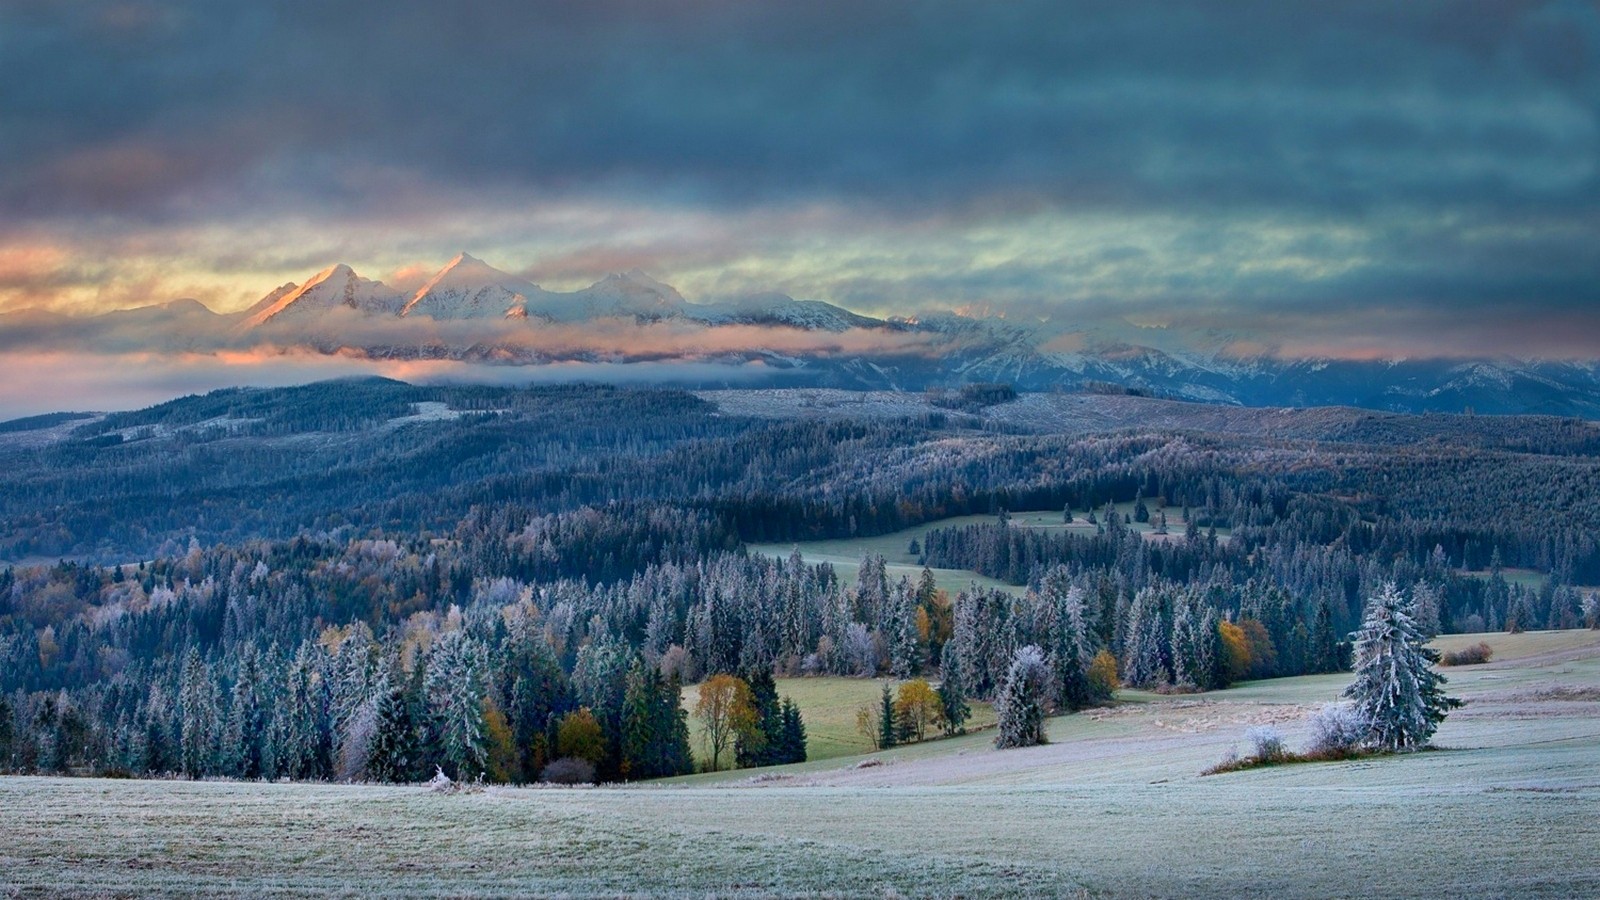 General 1600x900 nature landscape mountains forest sunset fall frost snowy peak clouds cold valley field far view